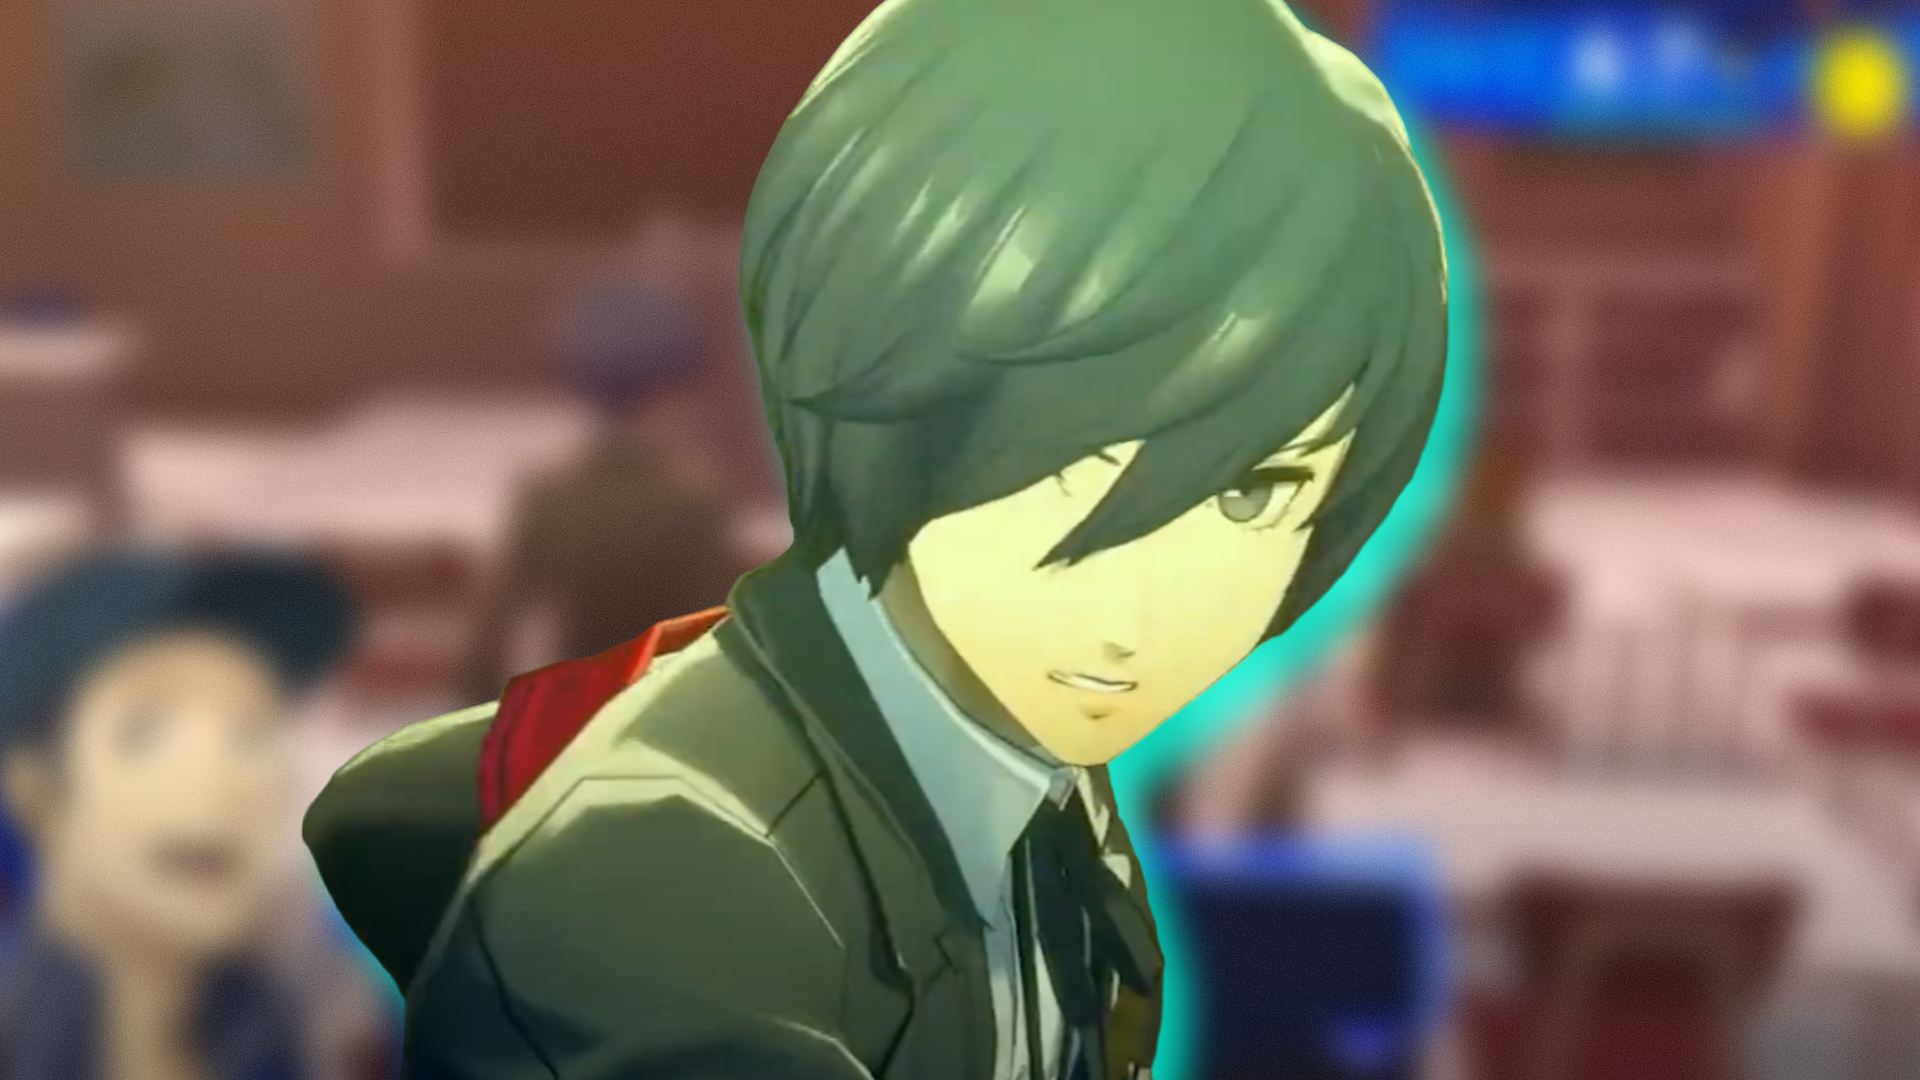 Persona 3 Reload is Now Available For PS5 and PS4